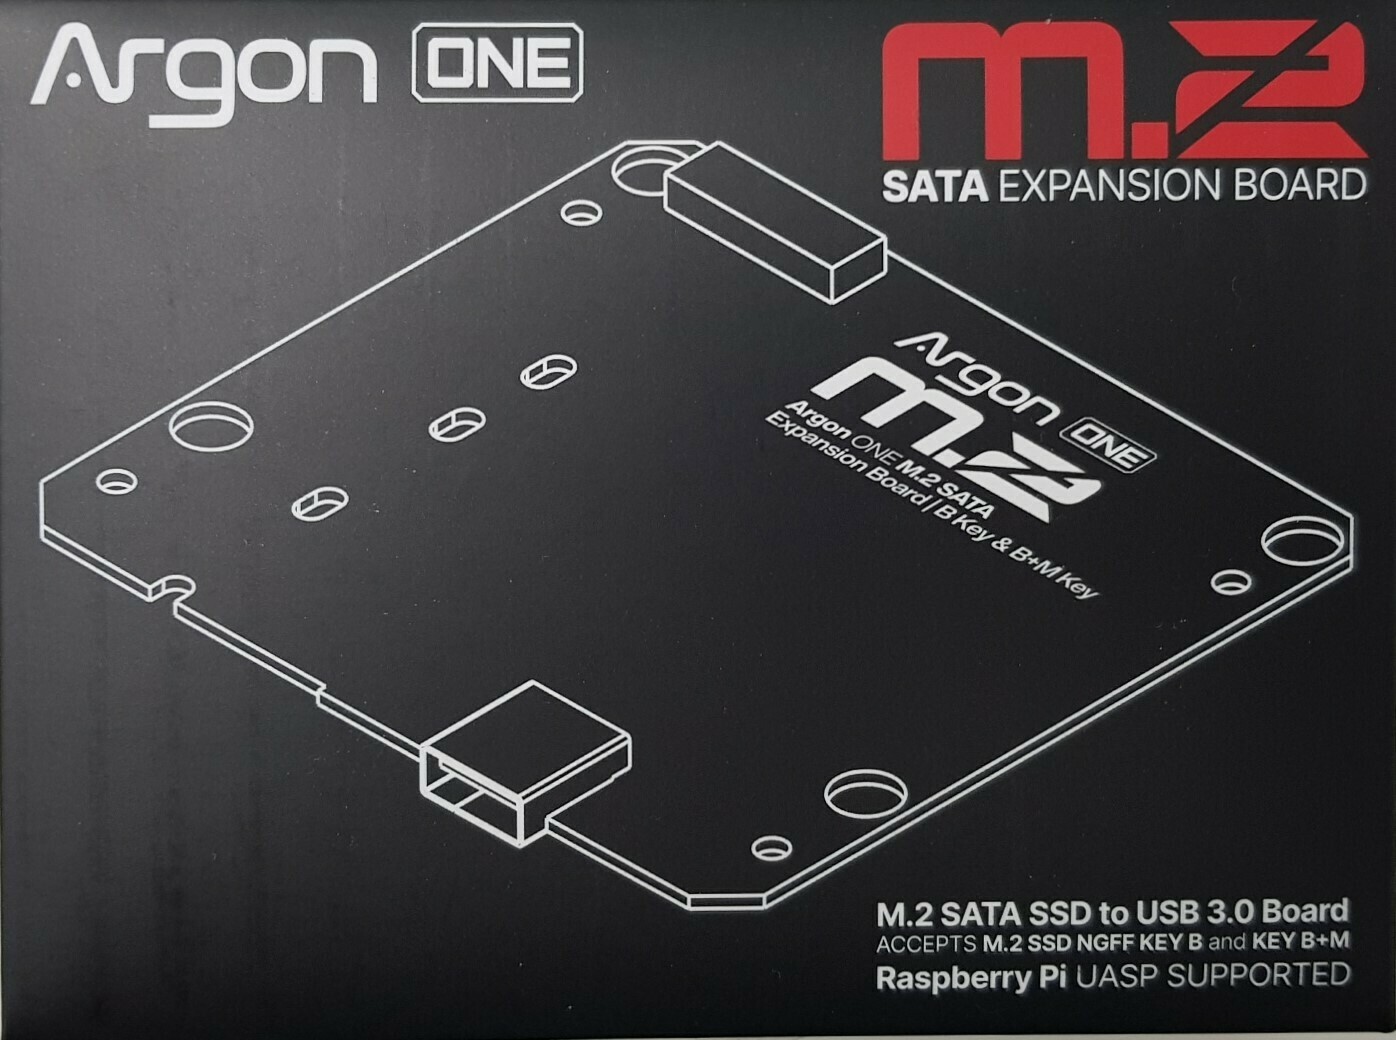 Argon ONE M.2 Expansion Board.